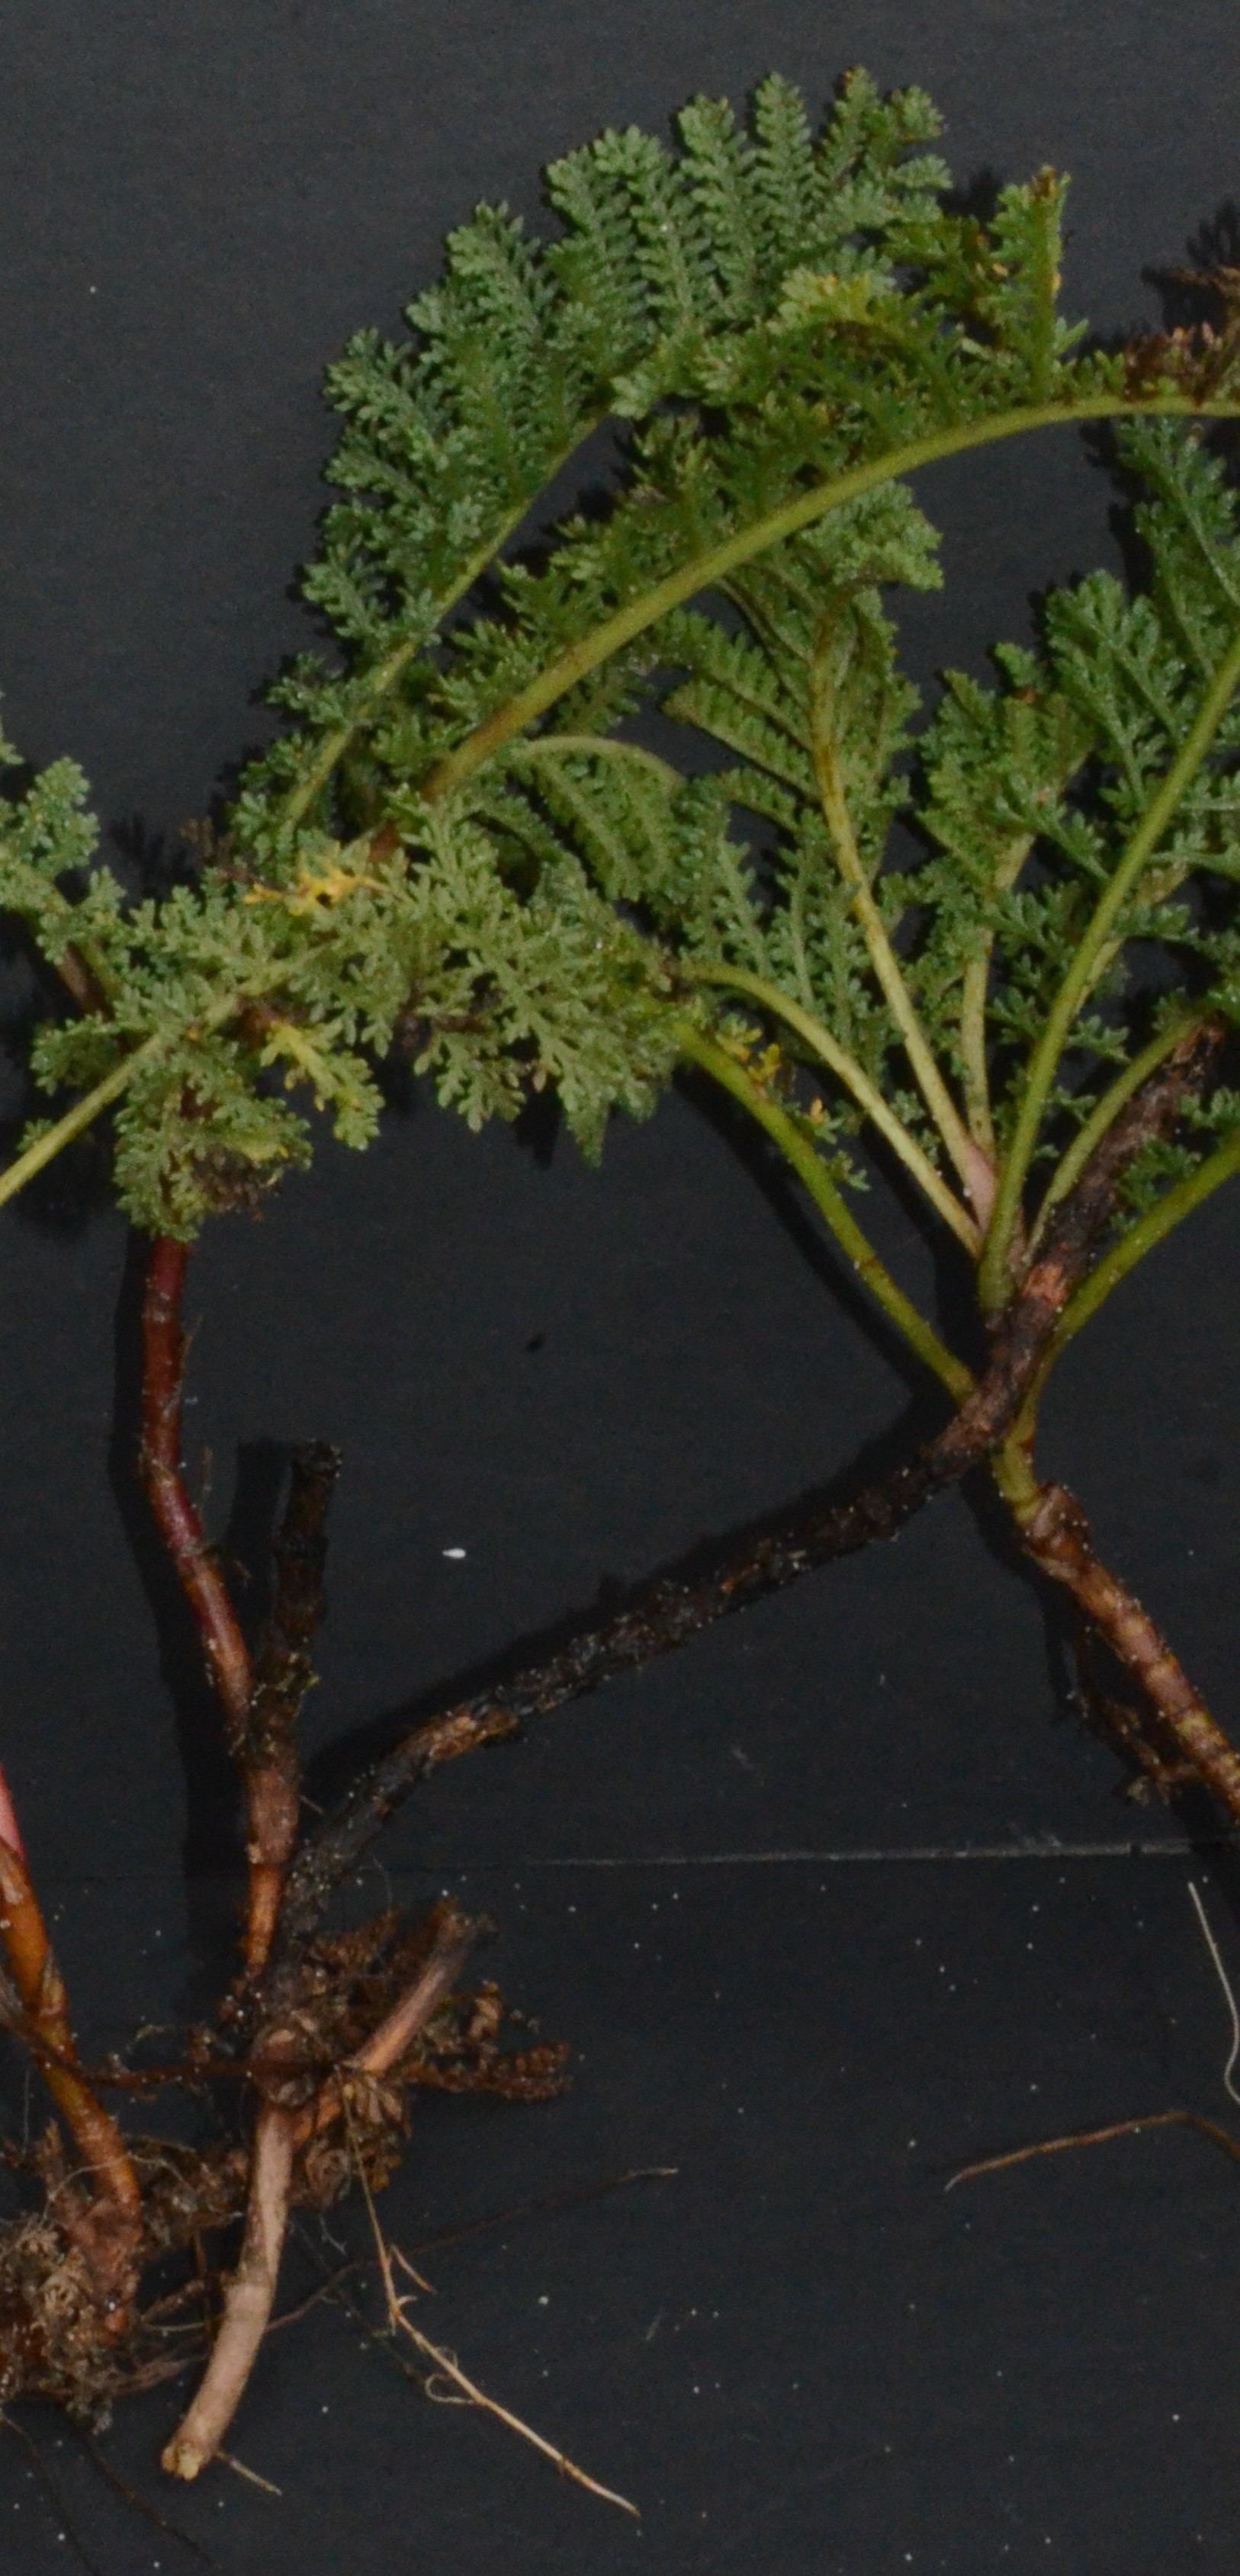 Tanacetum bipinnatum division with roots, stems, and leaves present. 